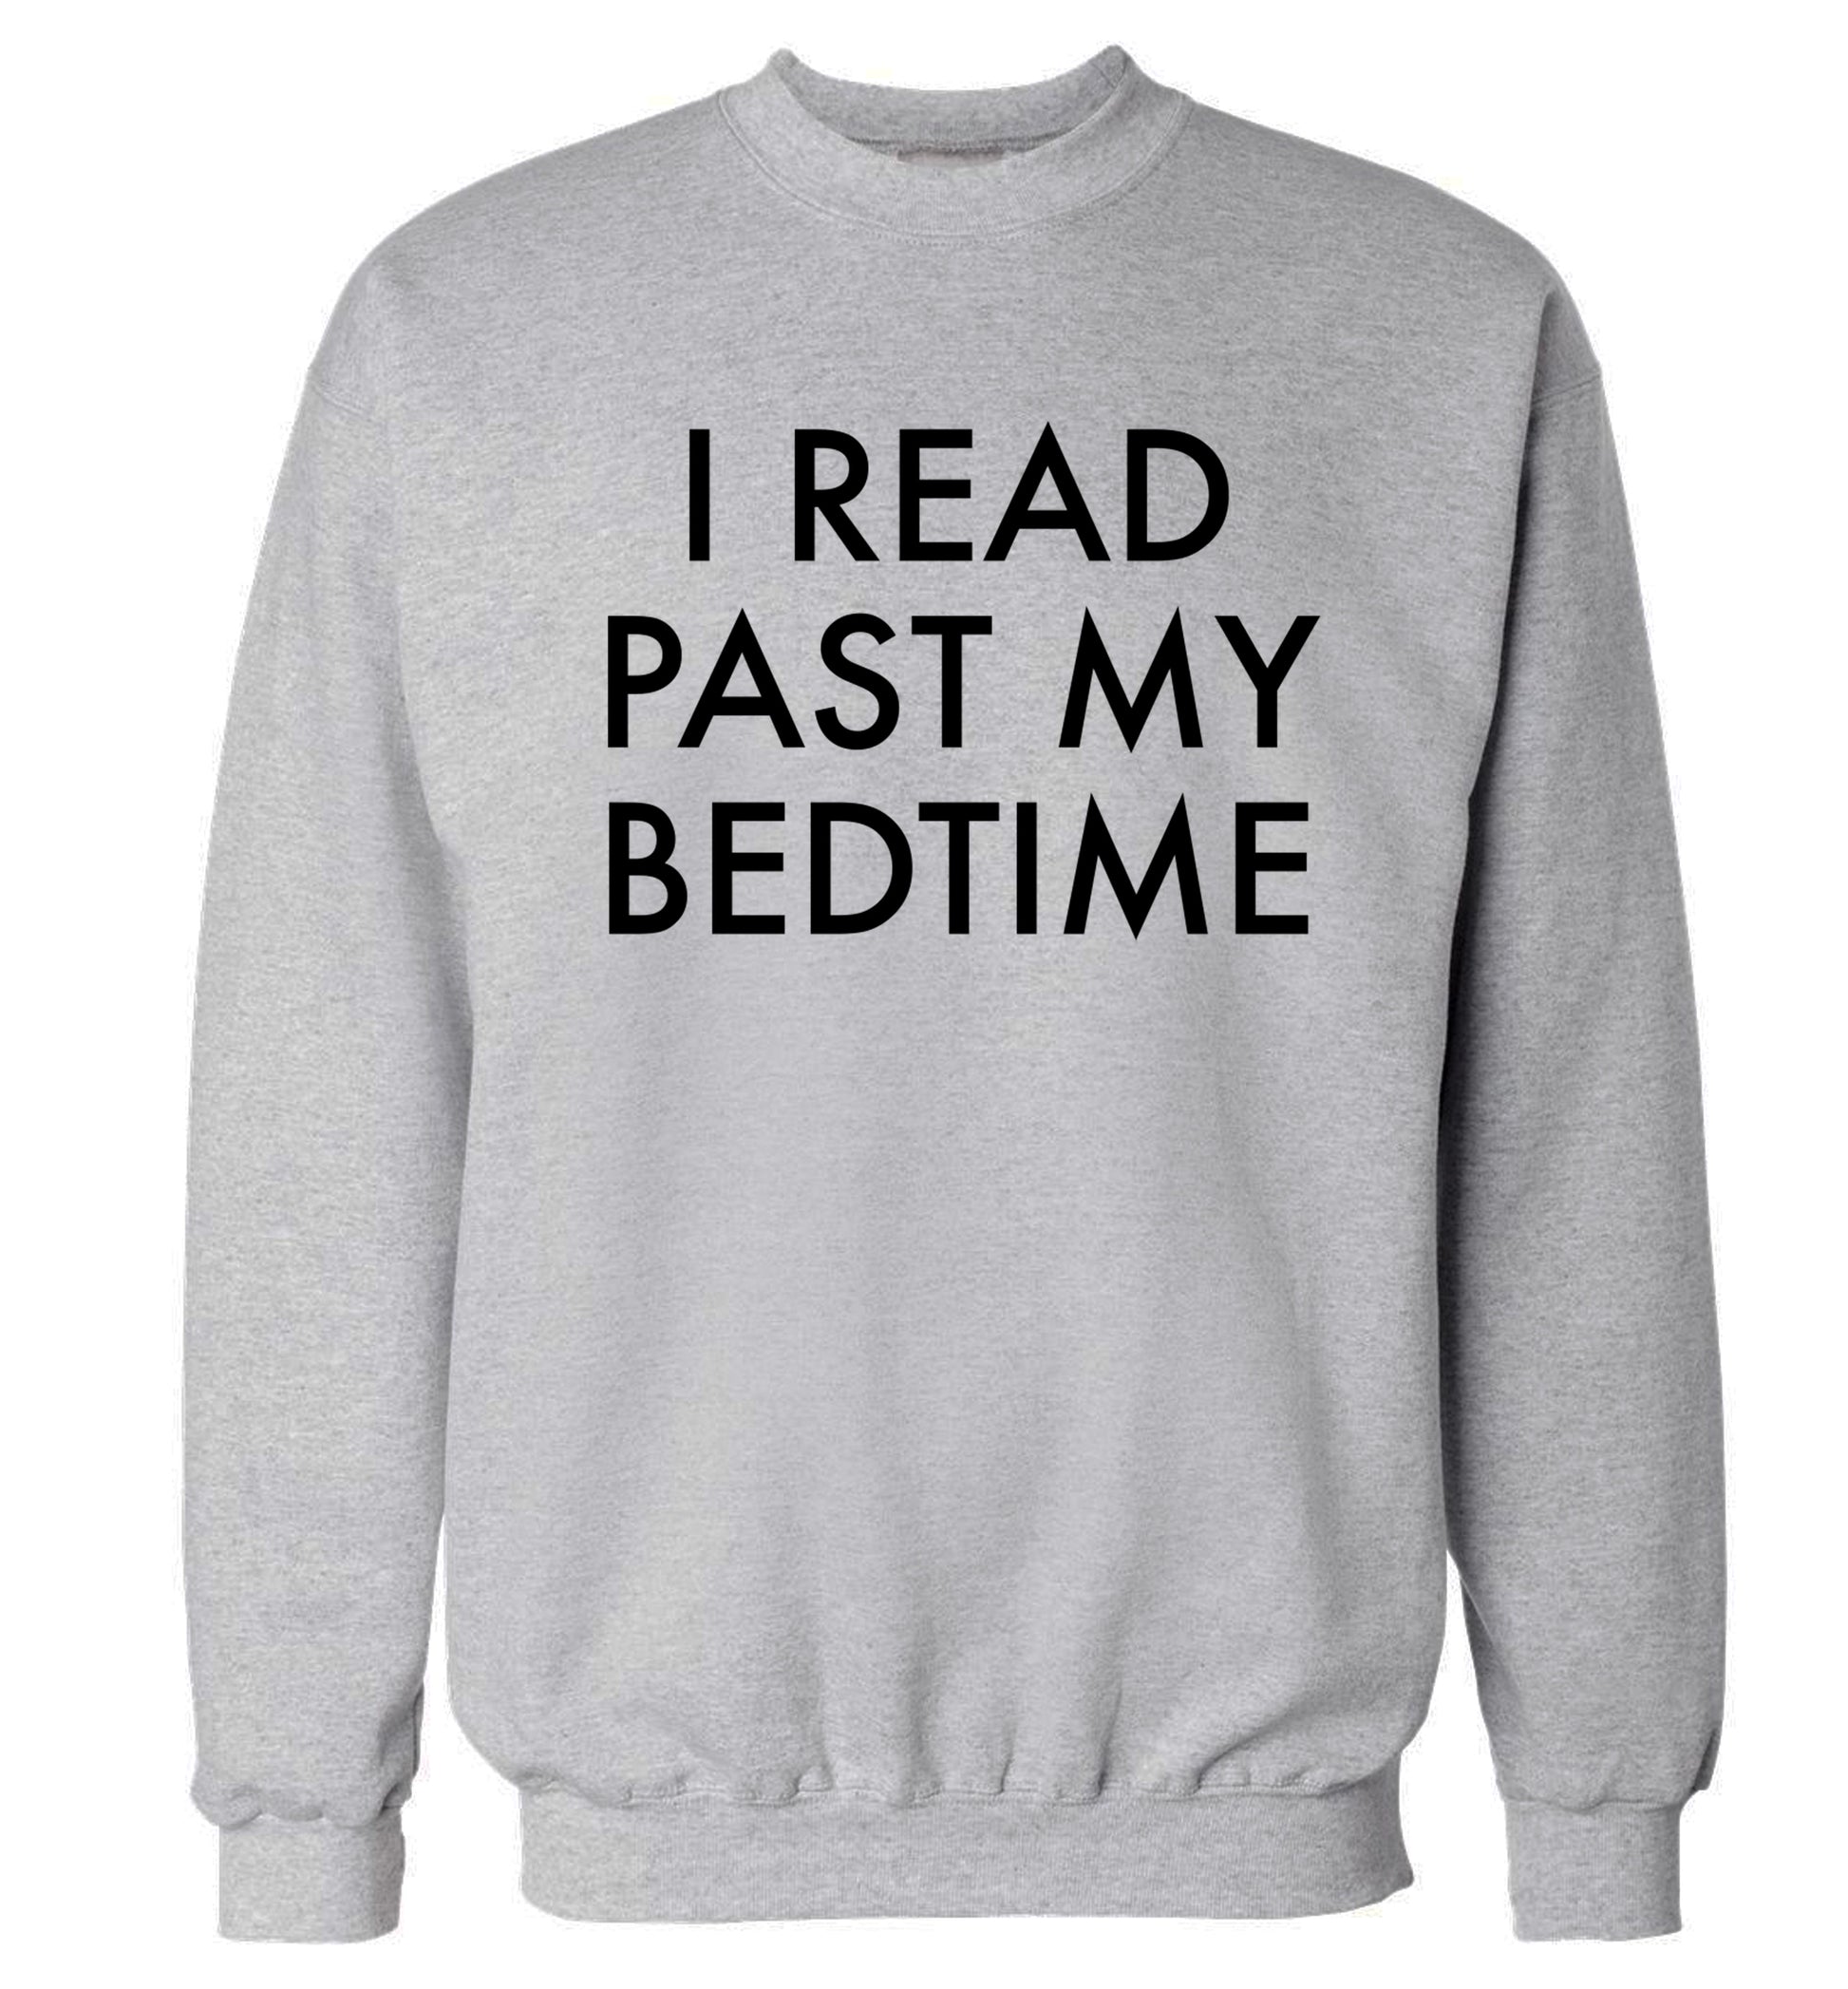 I read past my bedtime Adult's unisex grey Sweater 2XL